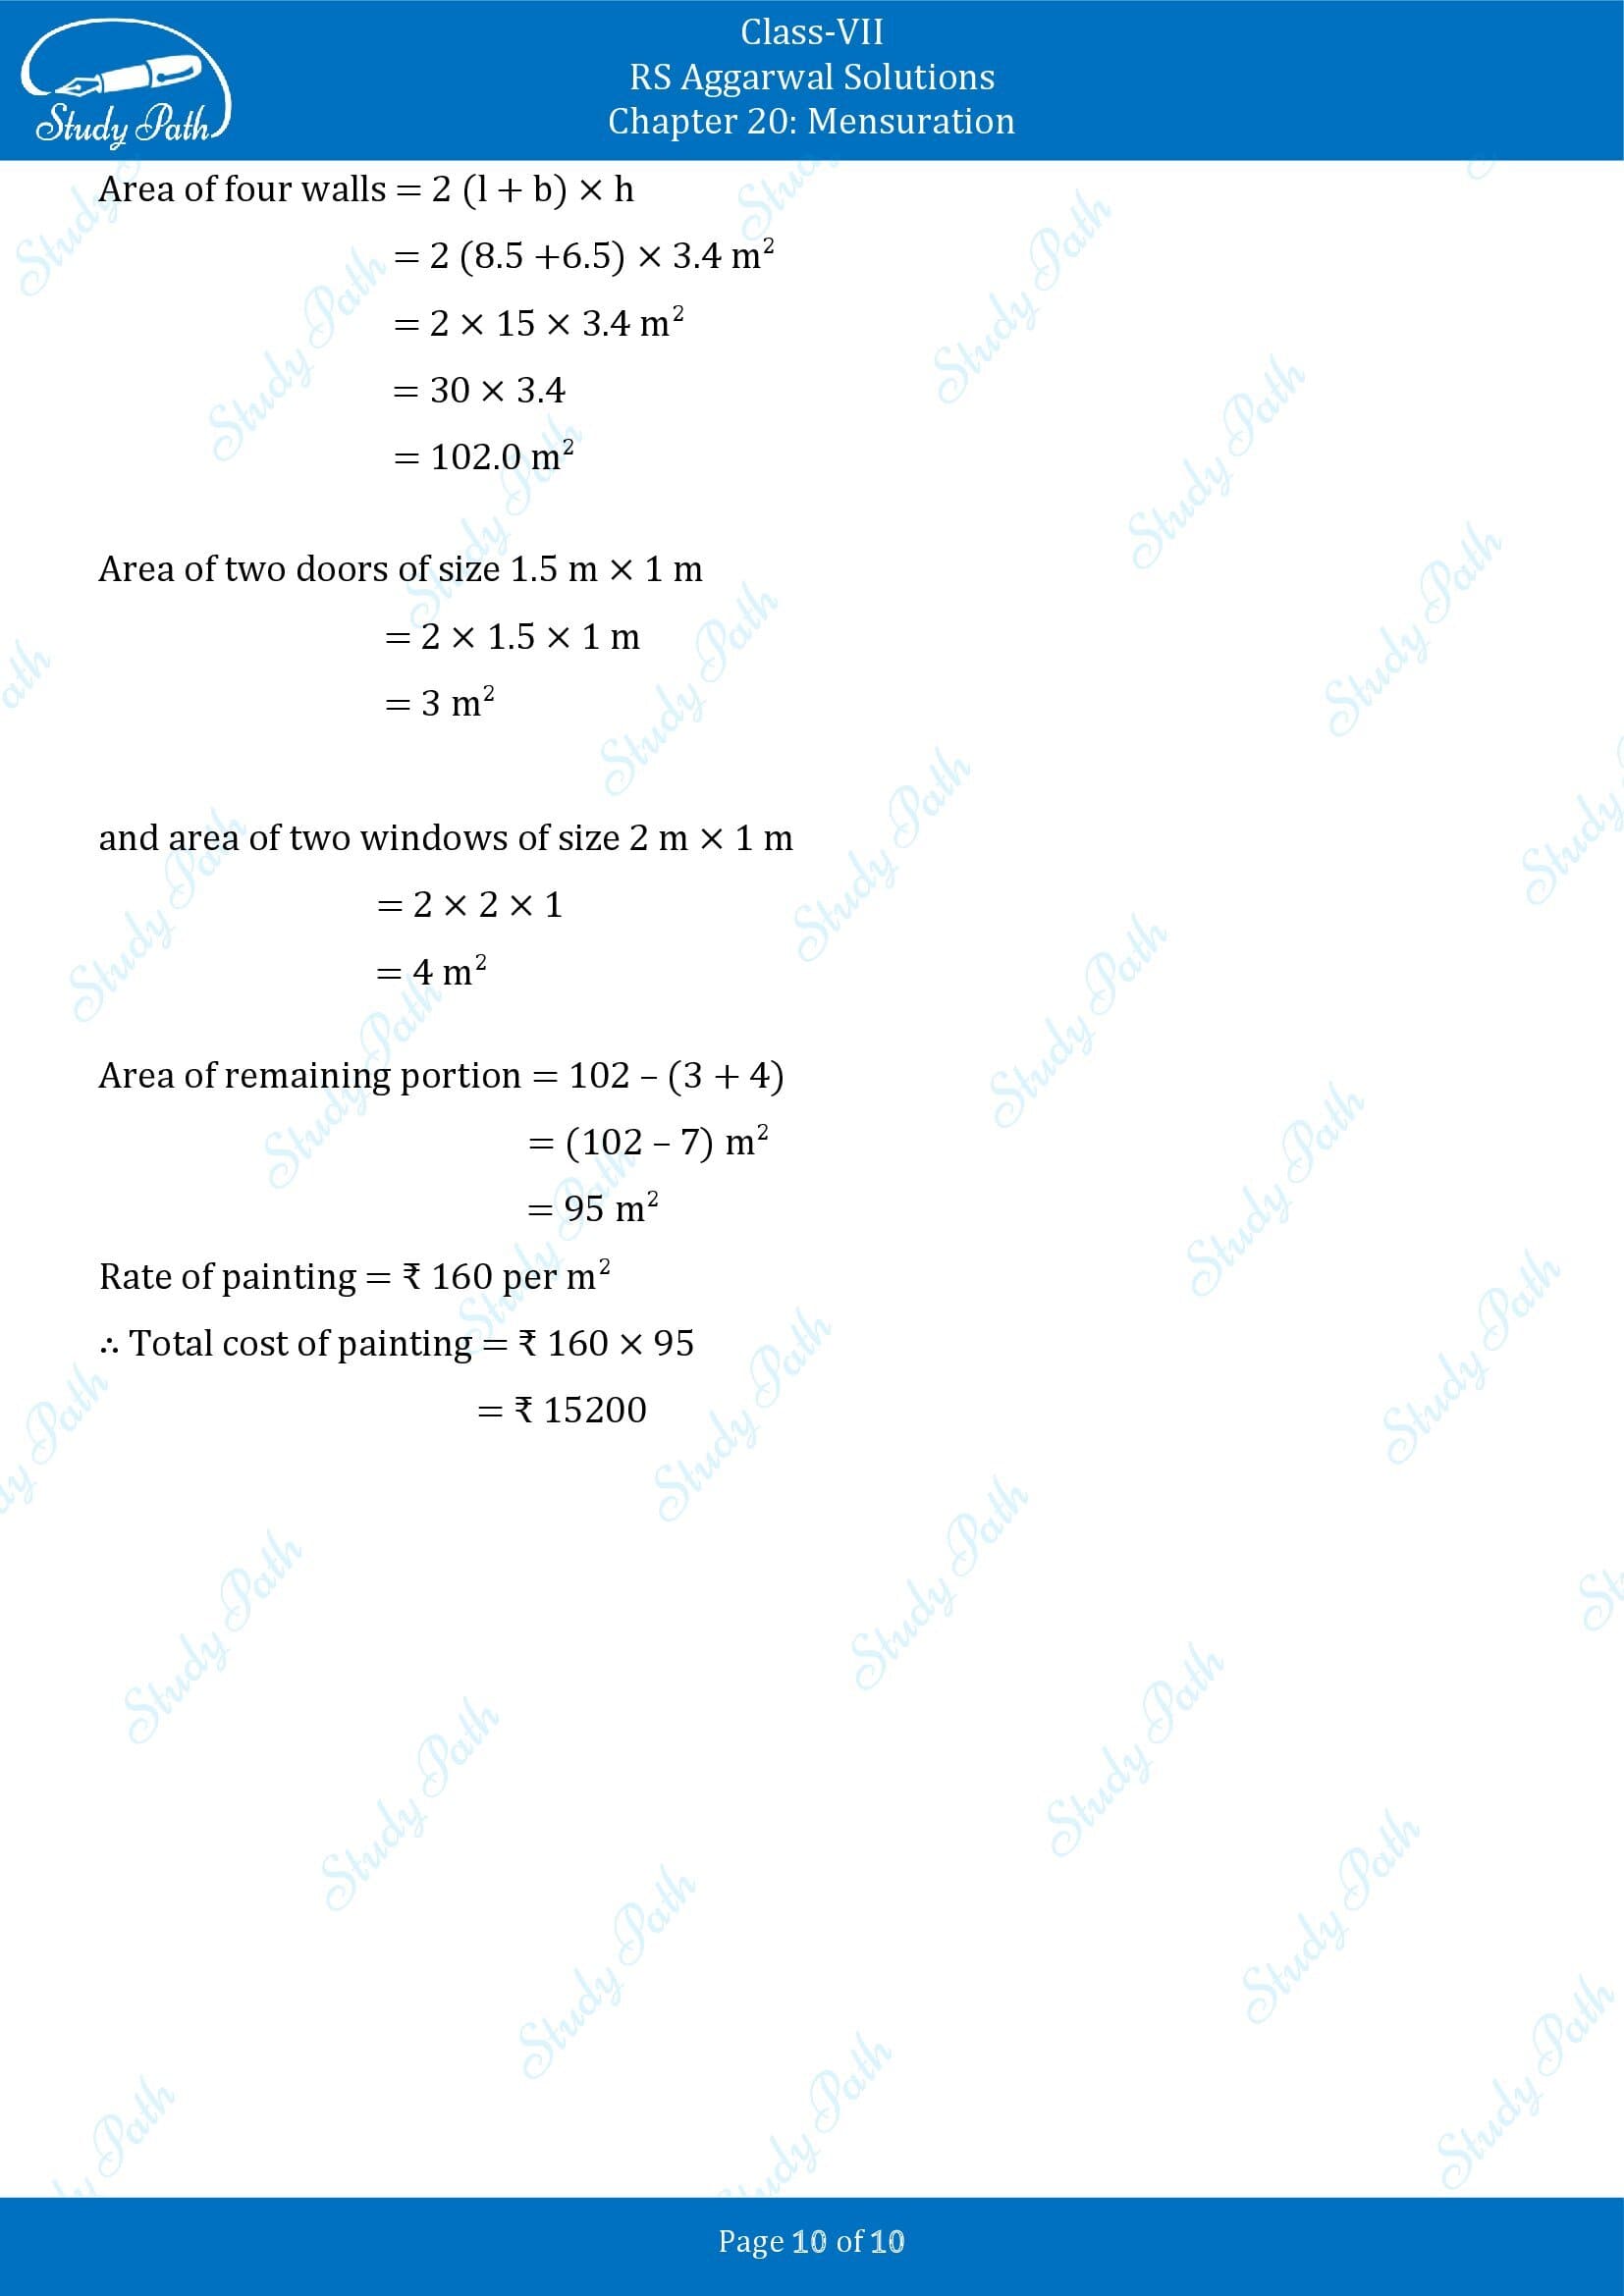 RS Aggarwal Solutions Class 7 Chapter 20 Mensuration Exercise 20A 00010